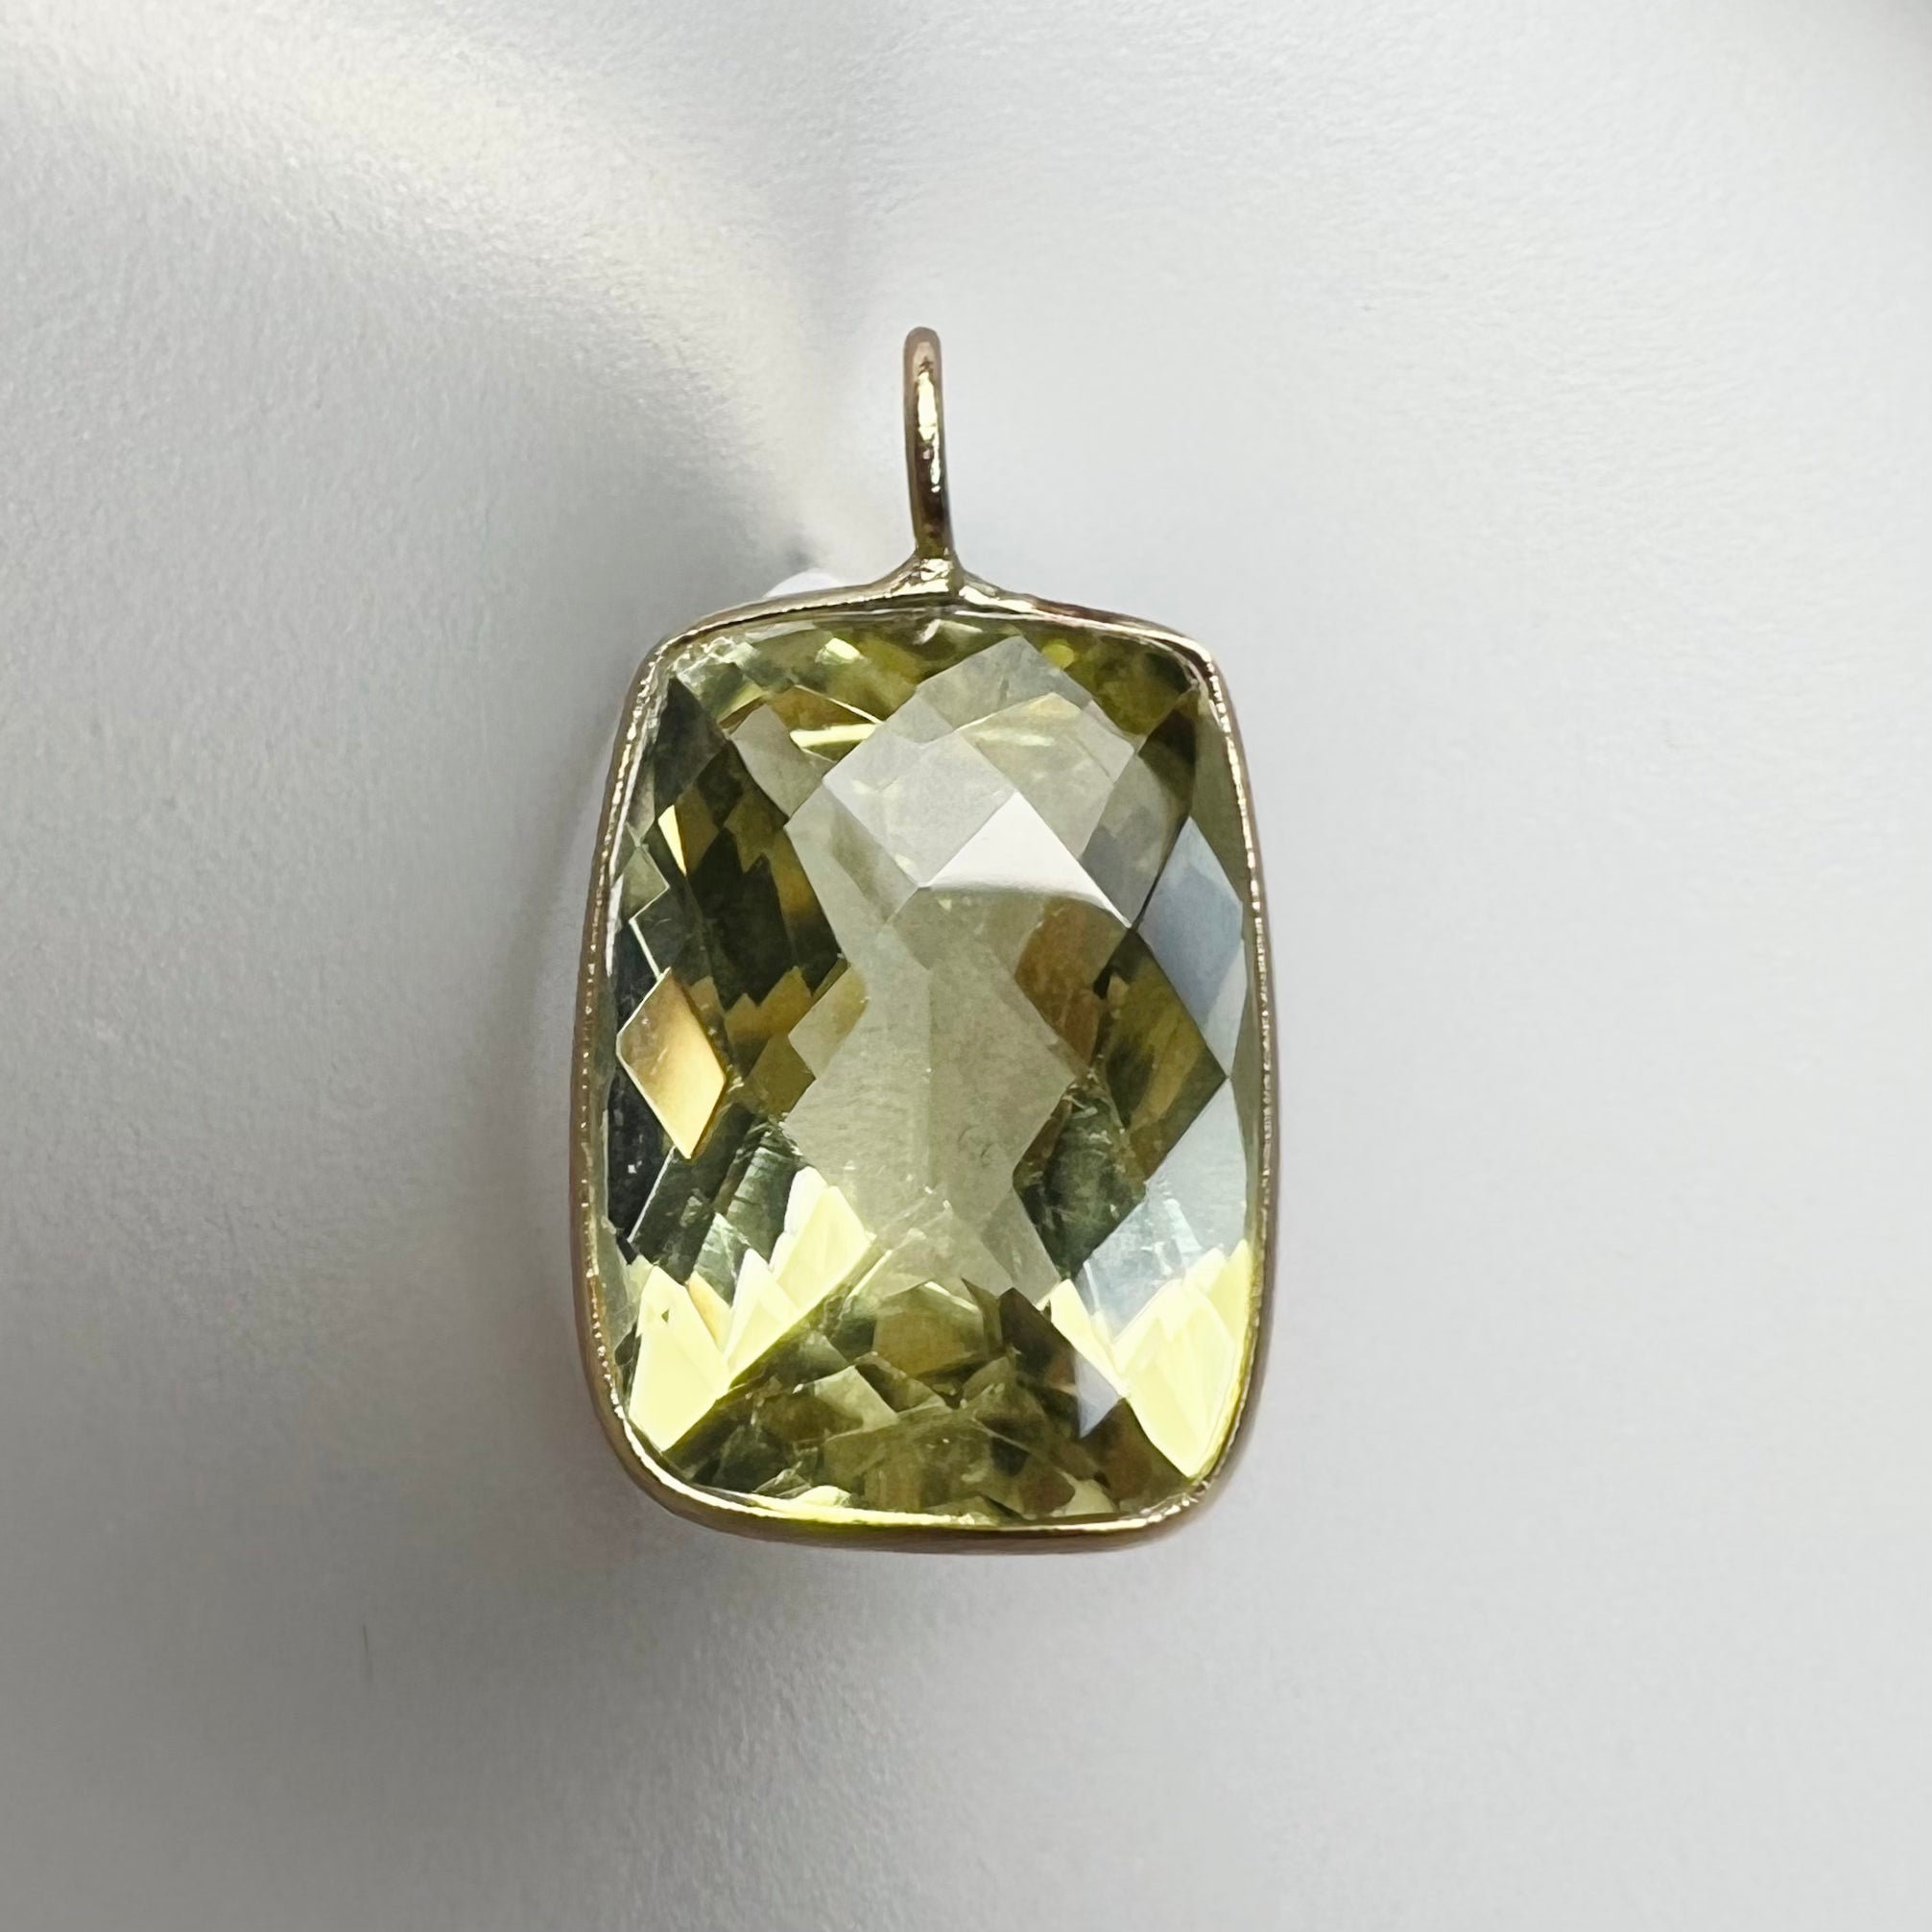 7CT Natural Yellow Rectangle Citrine 14K Yellow Gold Pendant Charm 19x11mm